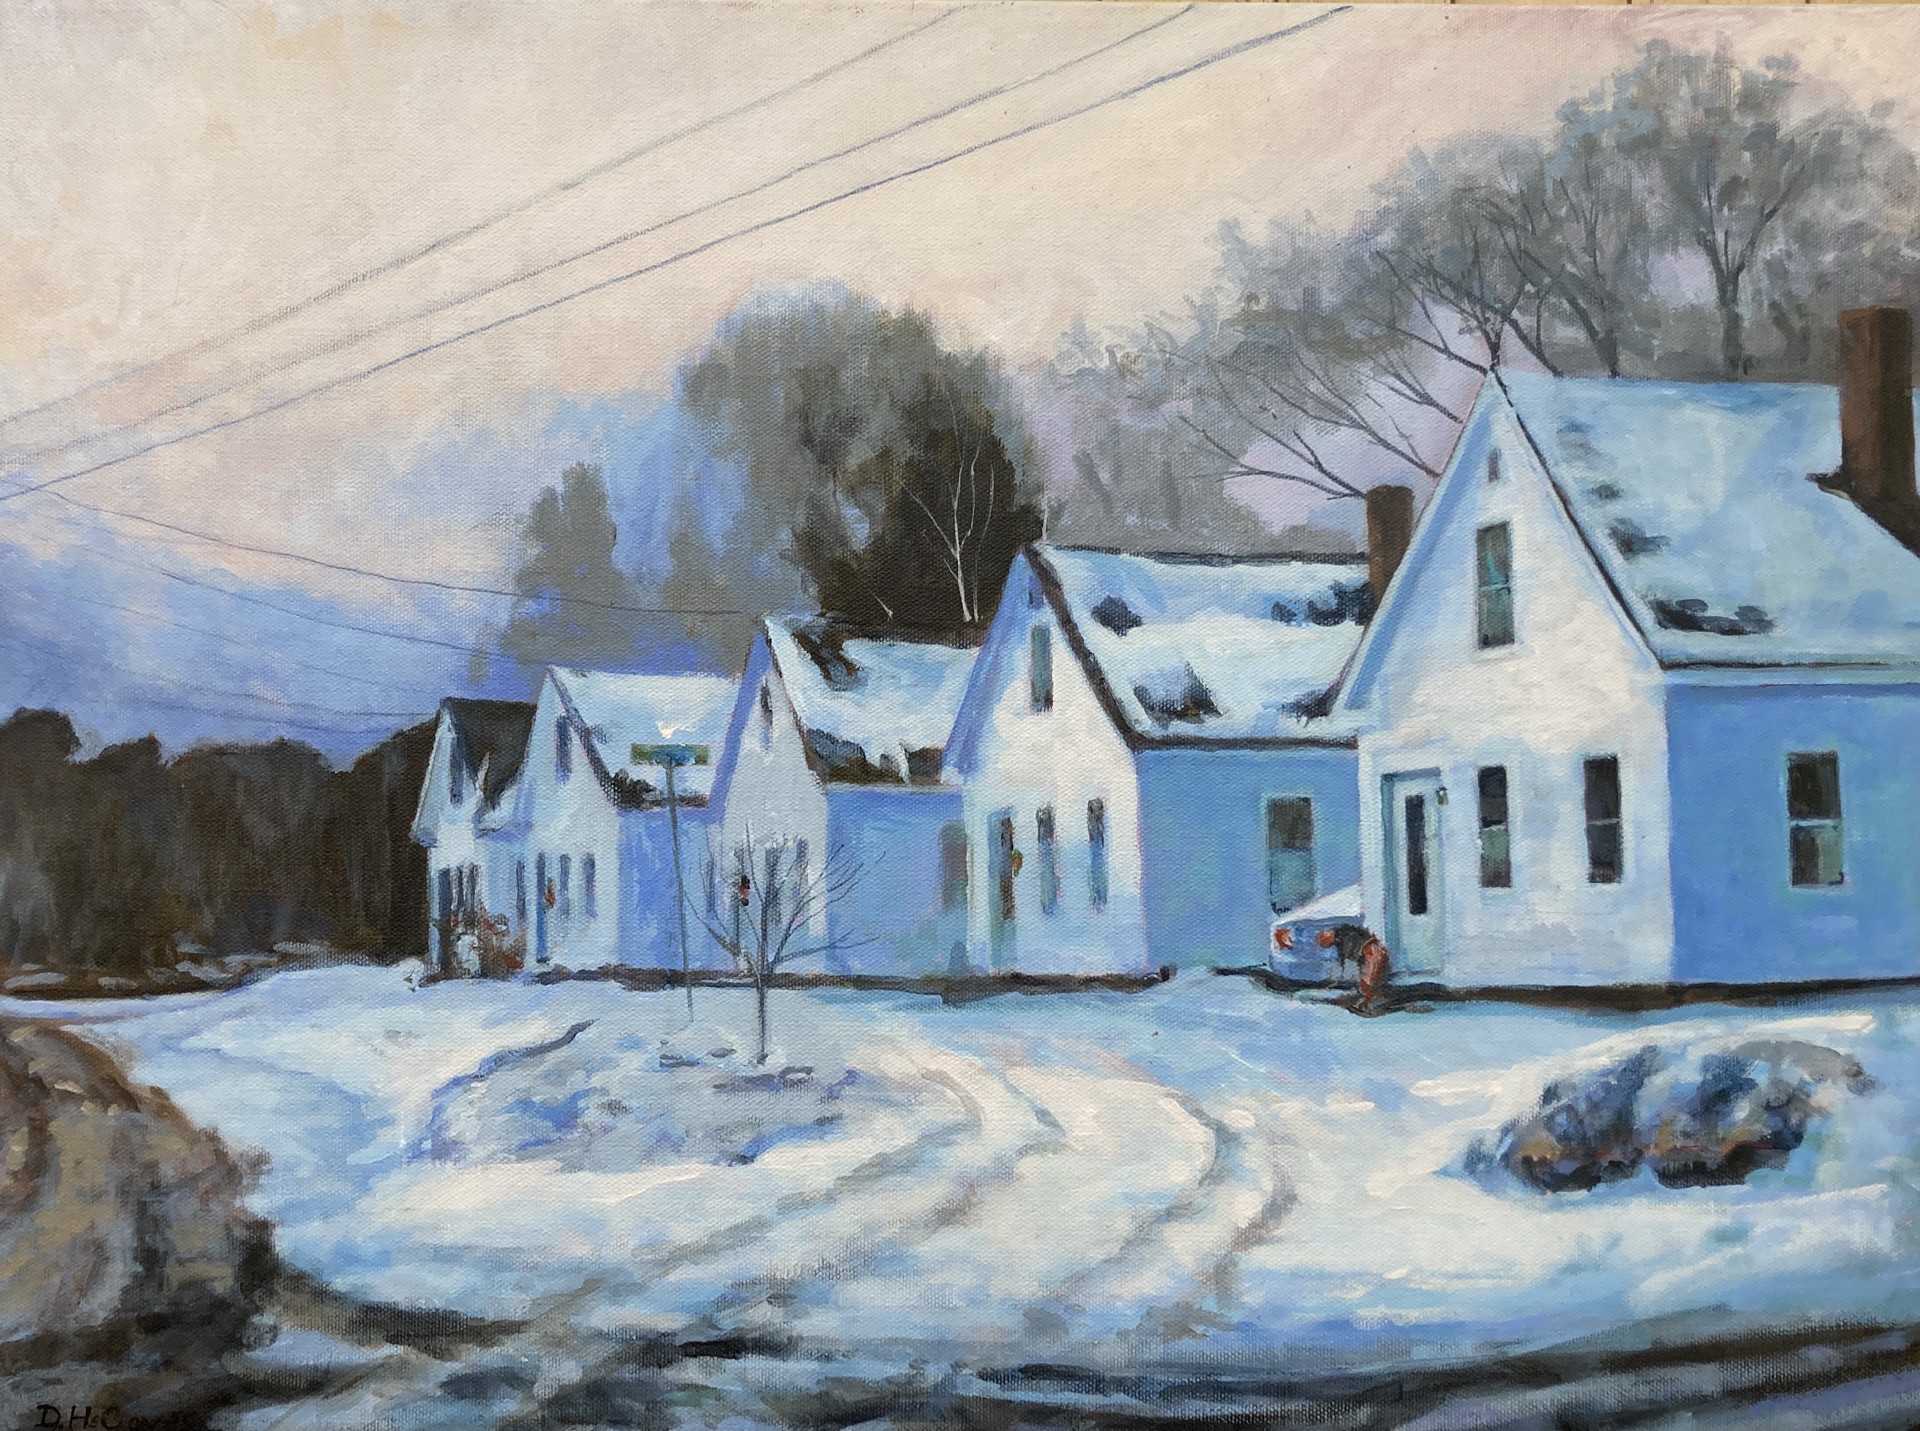 Winter Afternoon in Harrisville by Douglas H. Caves Sr.